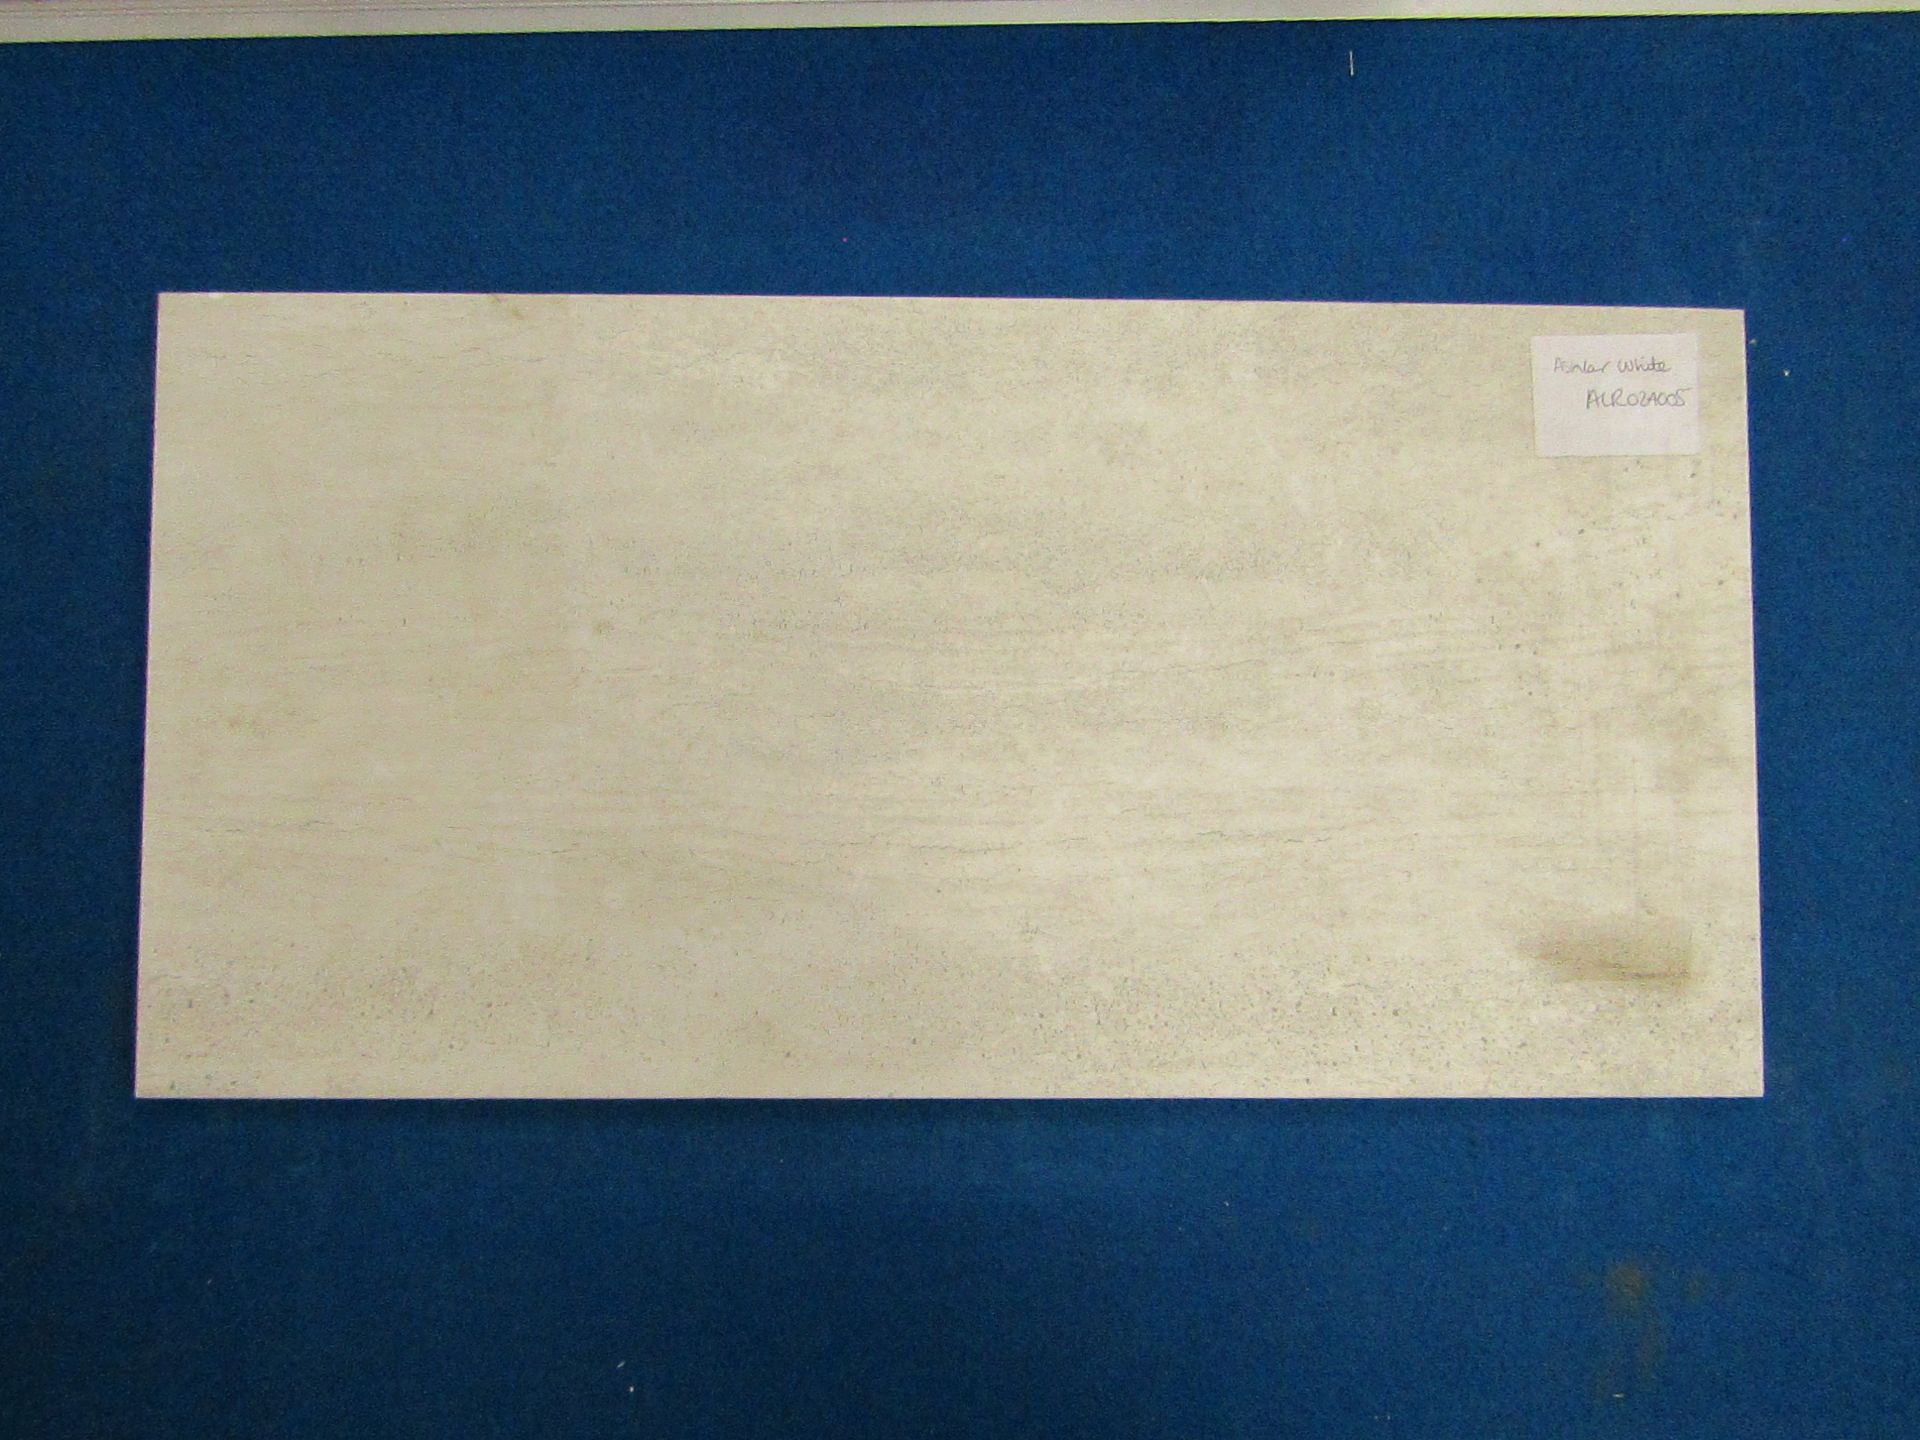 Pallet of 40x Packs of 5 Aslar White 300x600 wall and Floor Tiles By Johnsons, New, the pallet